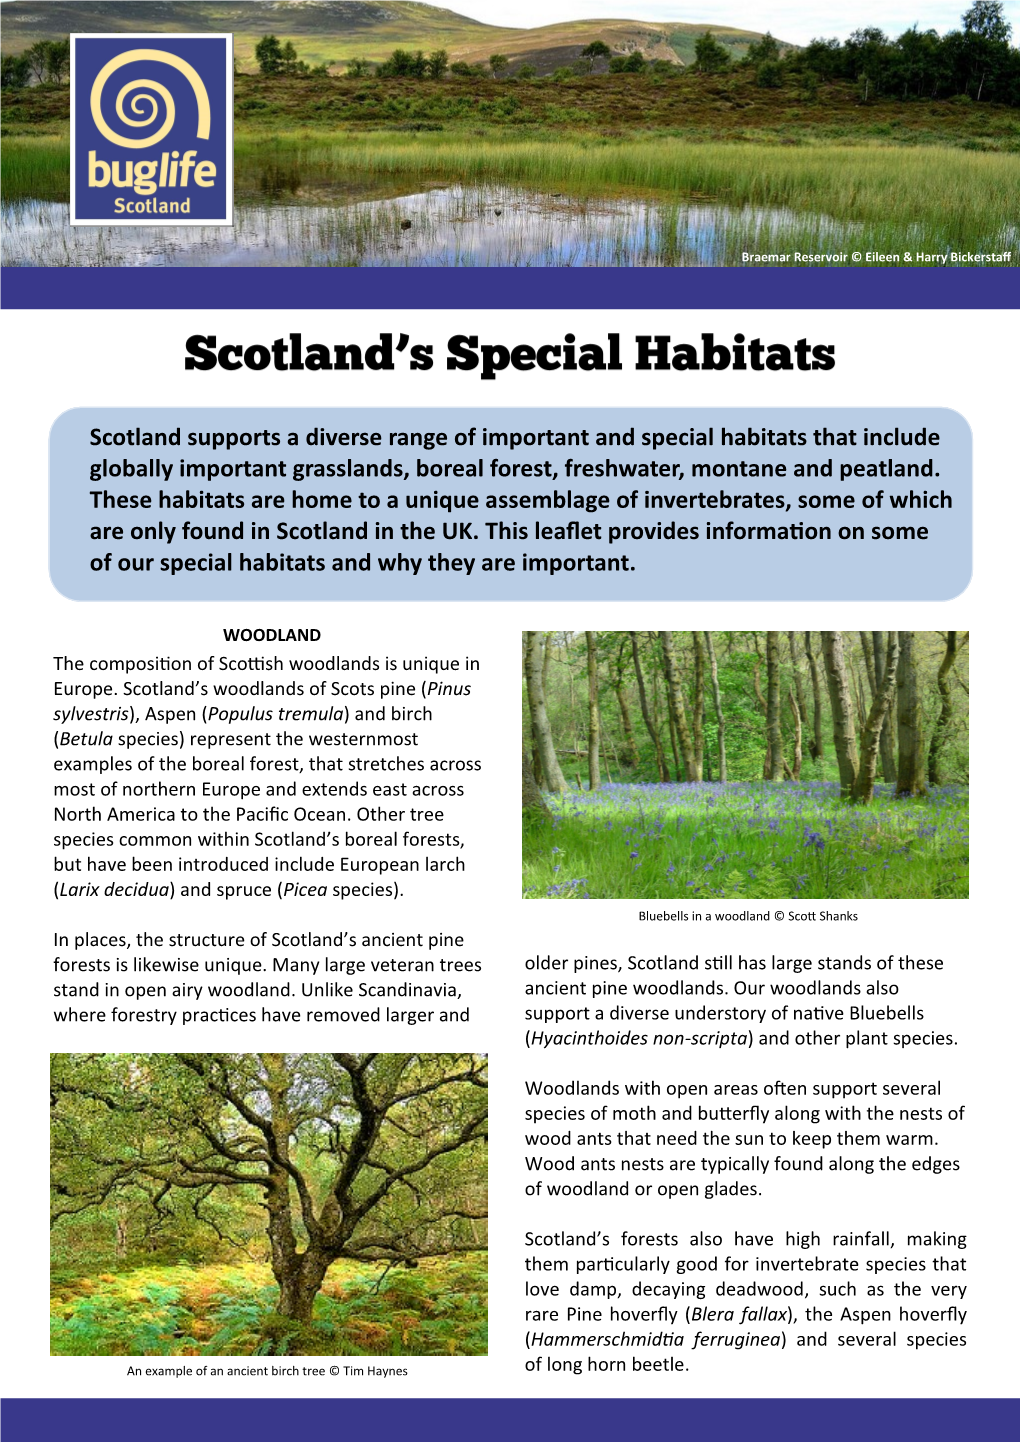 Scotland Supports a Diverse Range of Important and Special Habitats That Include Globally Important Grasslands, Boreal Forest, Freshwater, Montane and Peatland